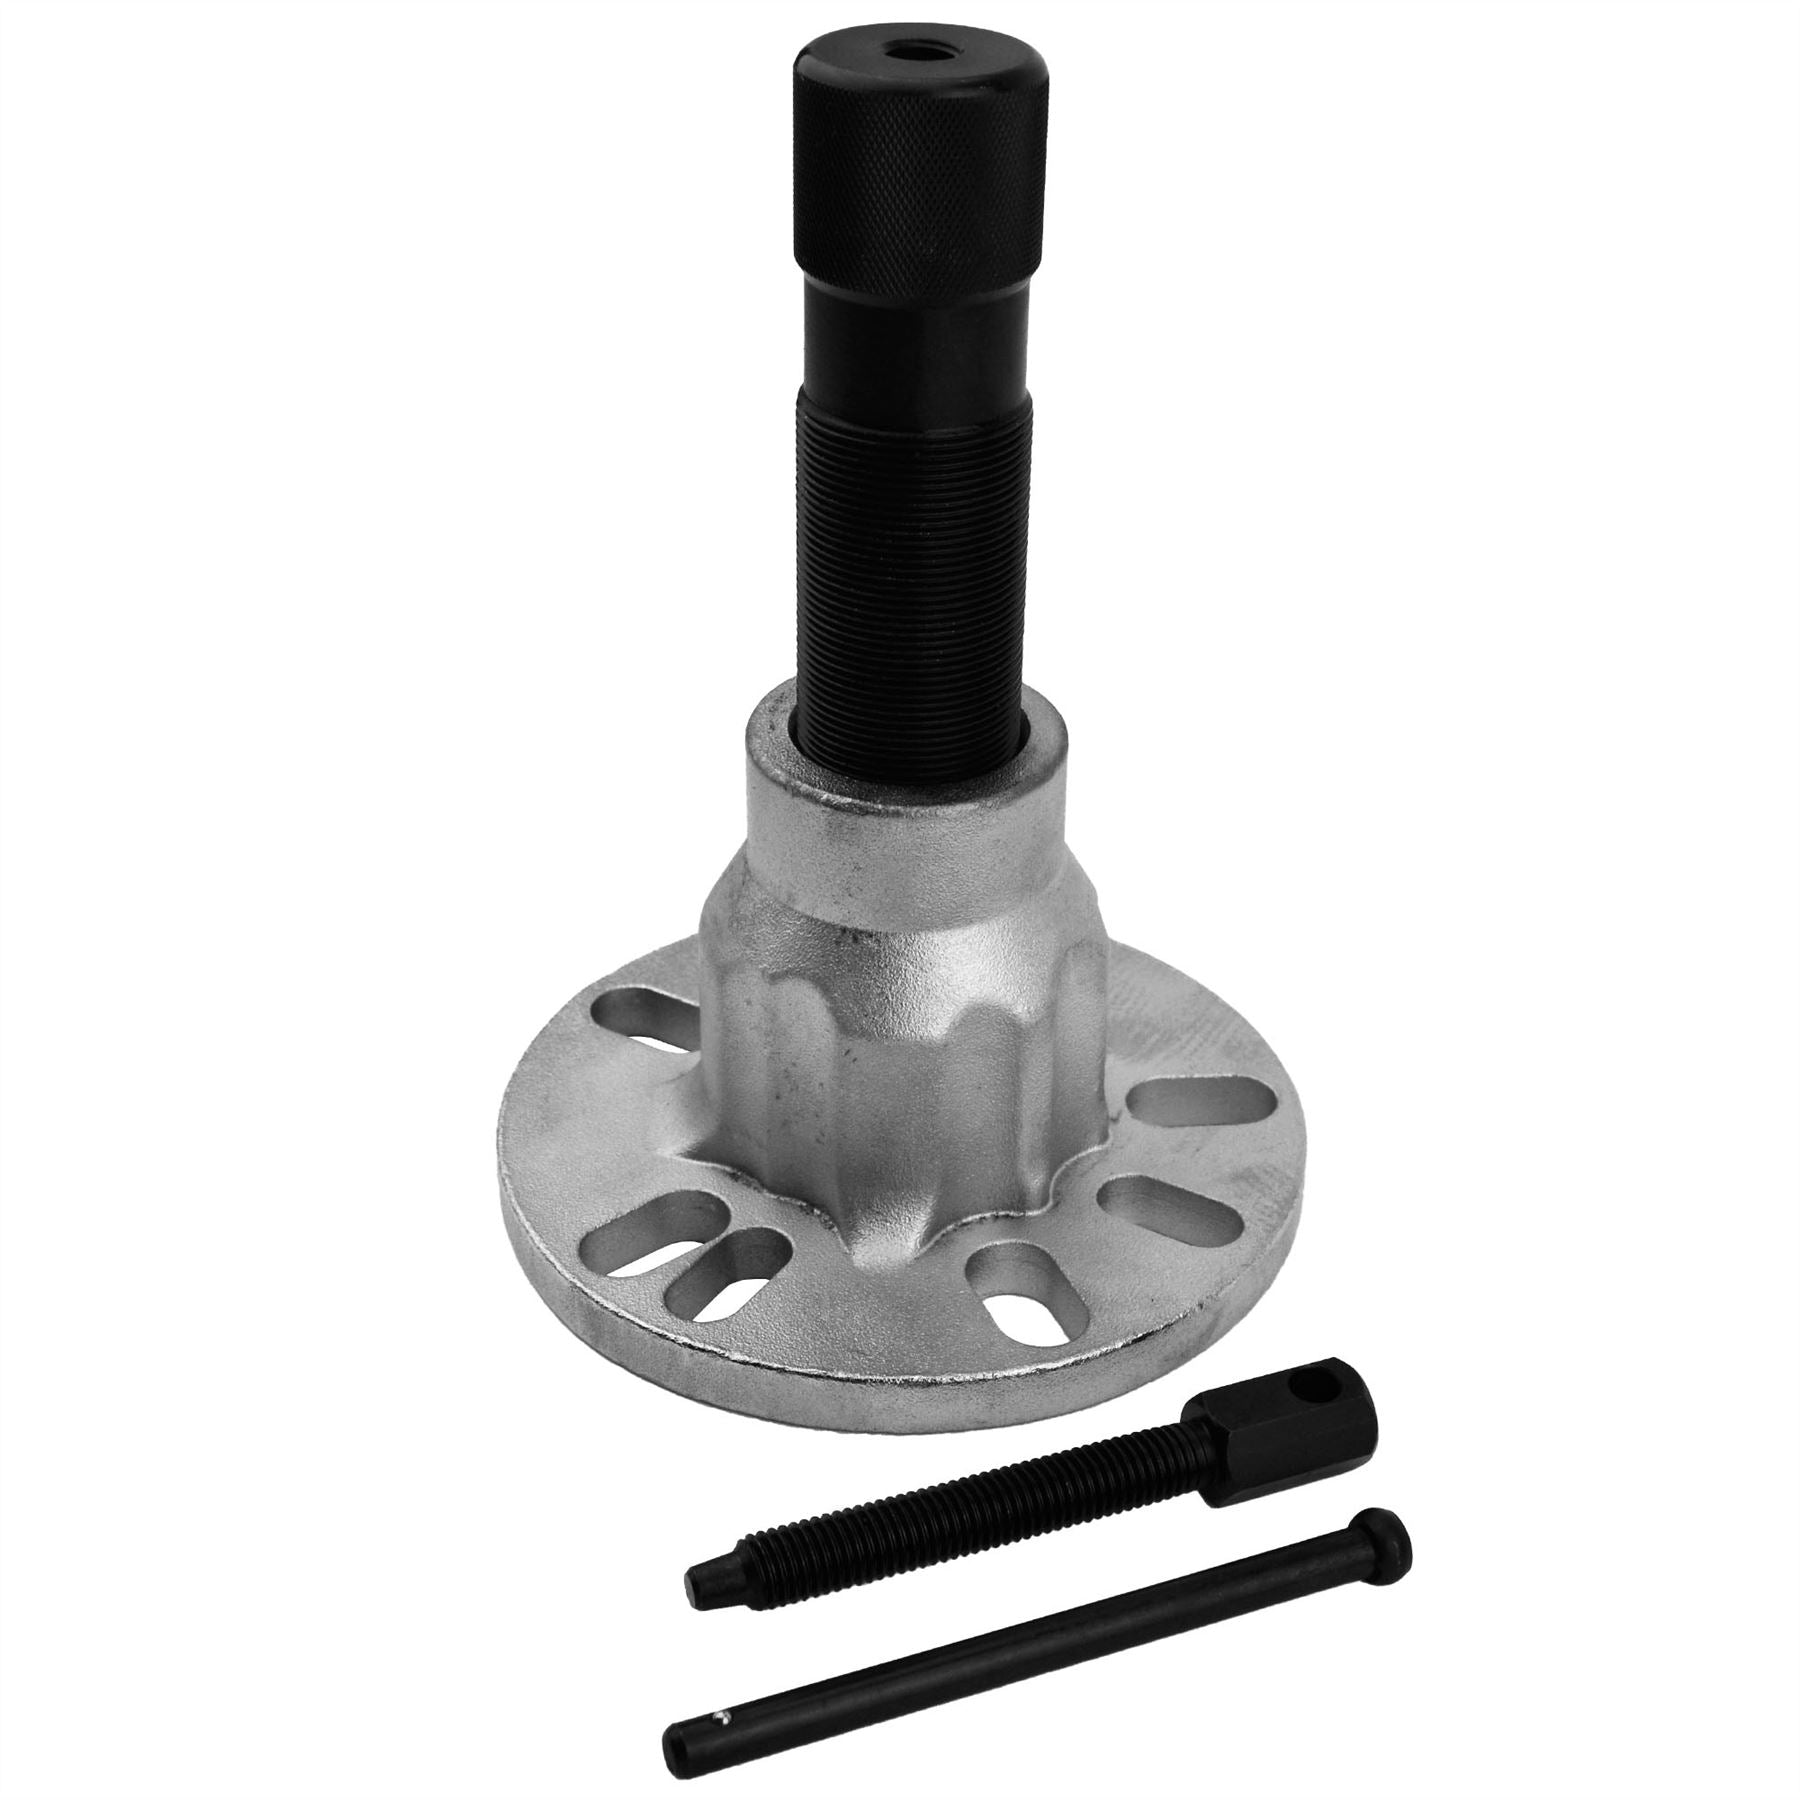 Hydraulic wheel hub puller 12 tonne power for 4 and 5 stud hubs U S PRO AT132